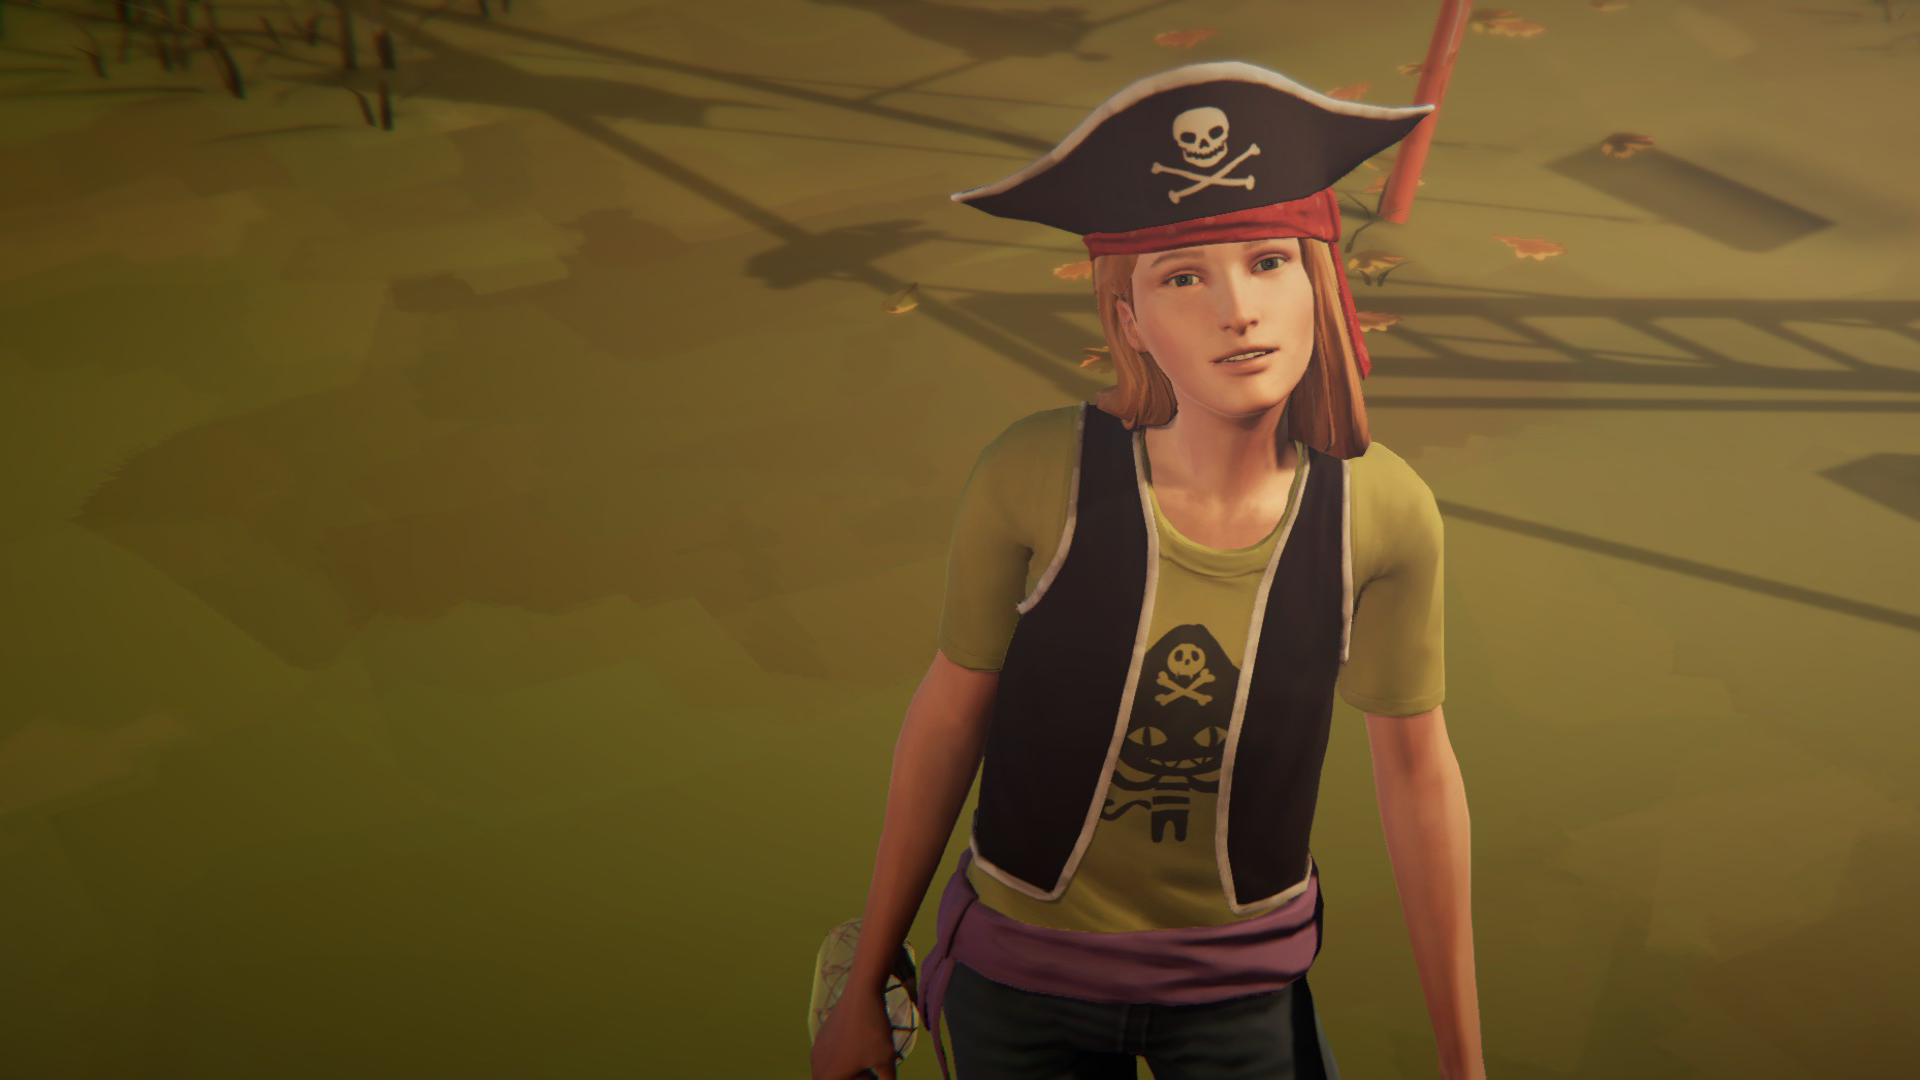 General 1920x1080 Life Is Strange pirates screen shot Chloe Price video games video game characters